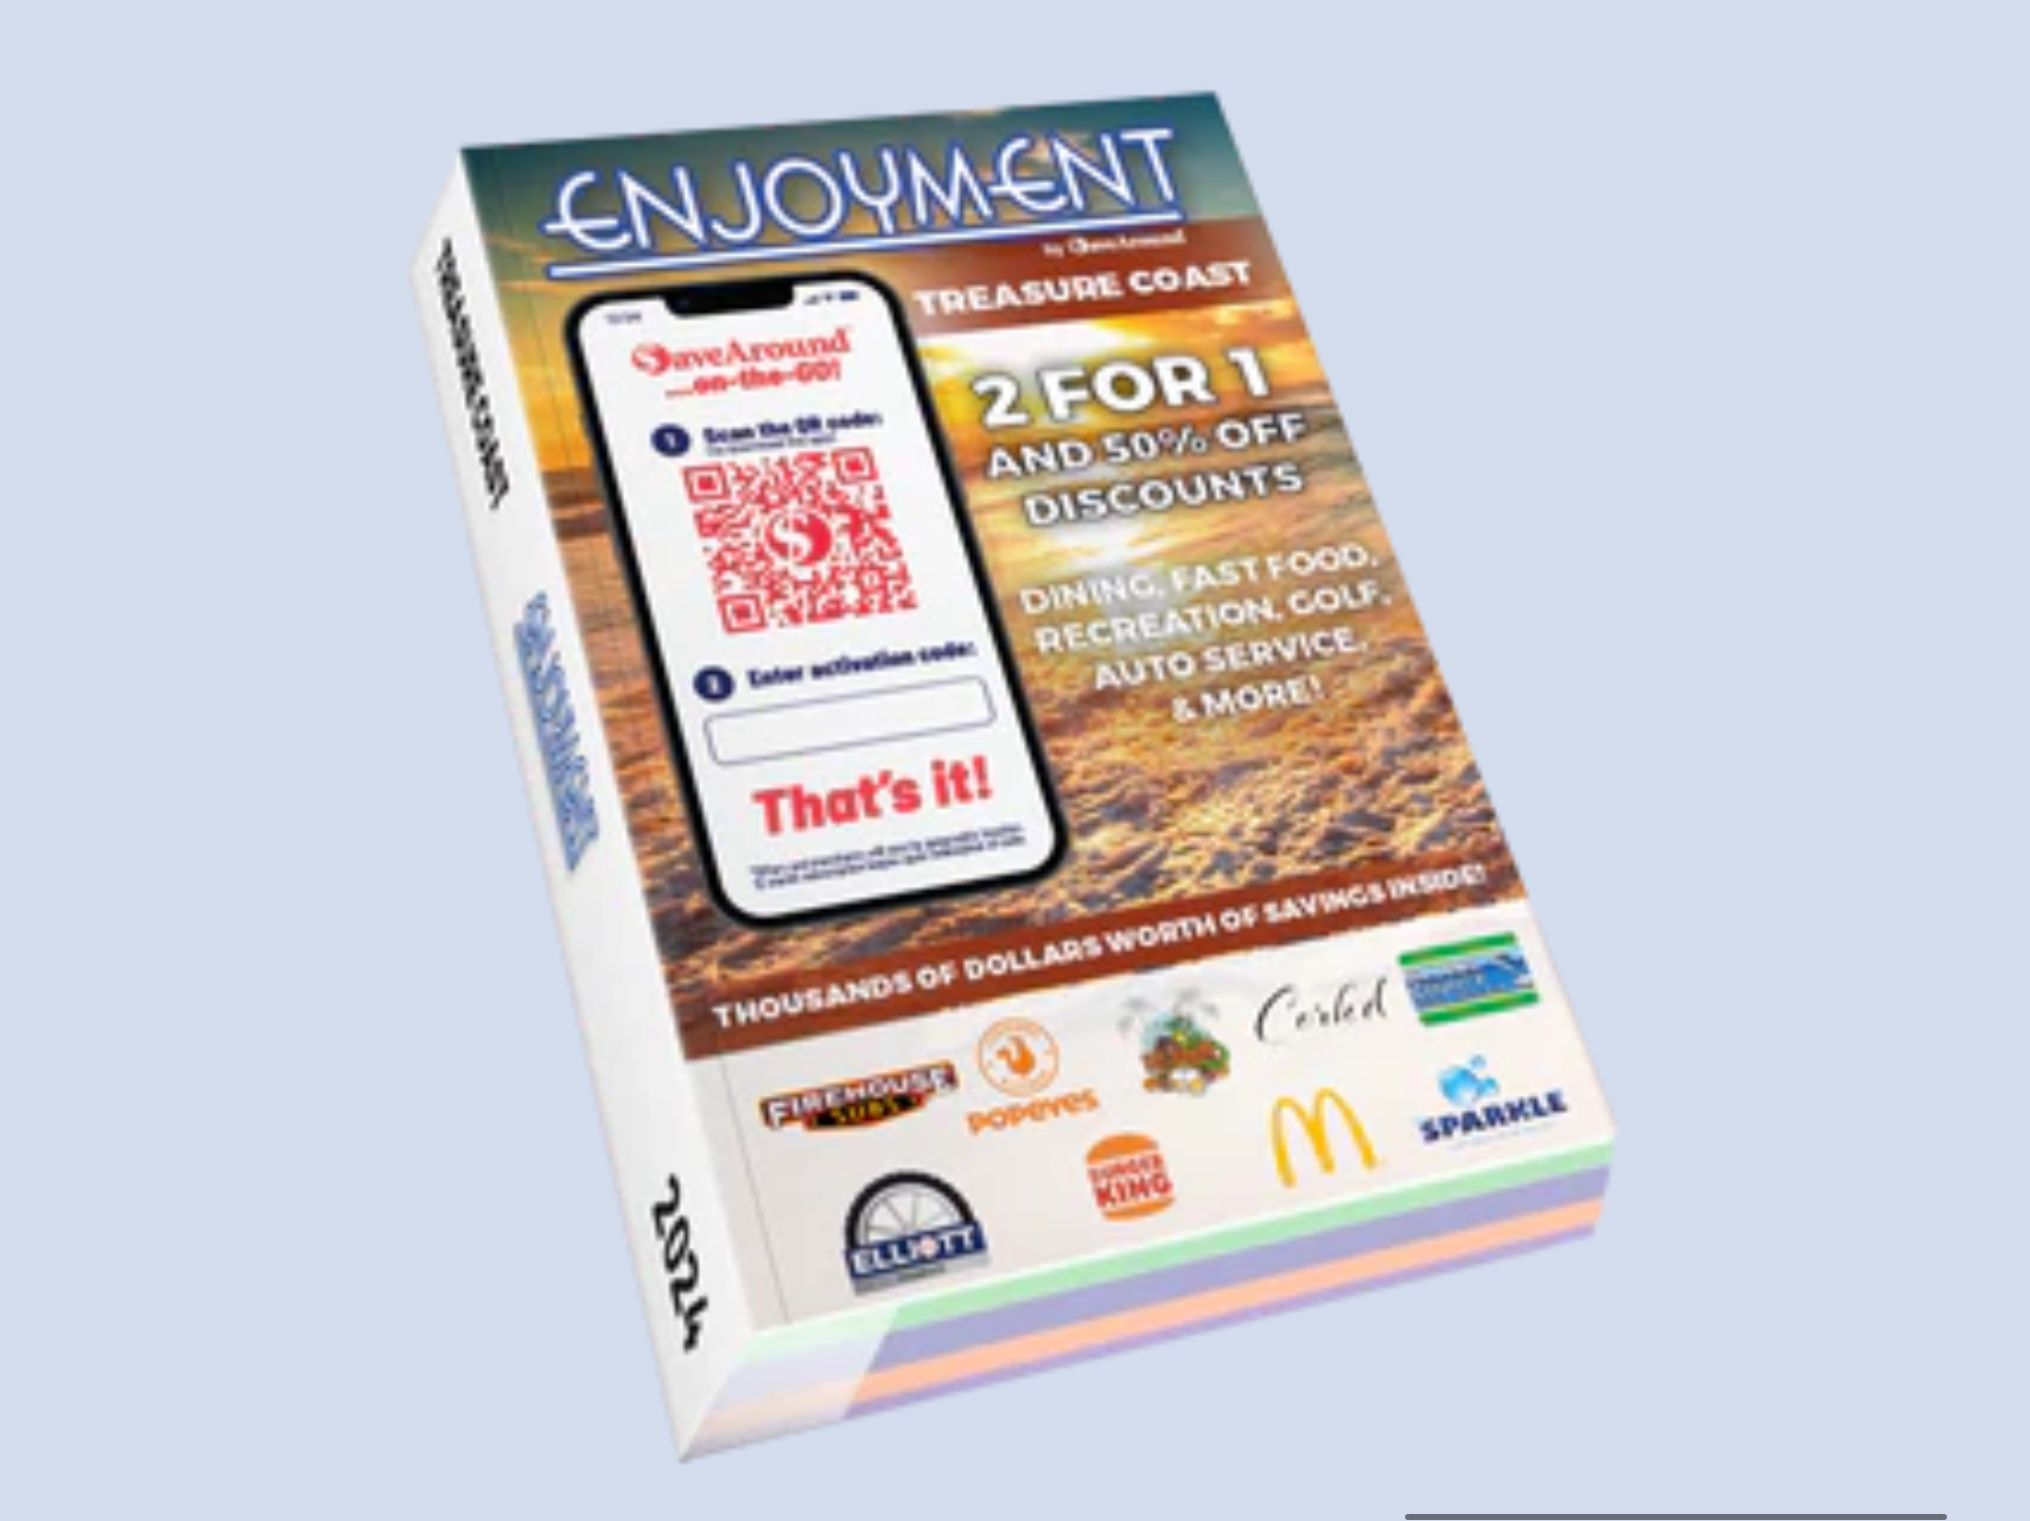 Treasure Coast Discount Book-Enjoyment by Save Around Reg.$35.00 Only - $20.00 WOW - What a GREAT Deal - 1 coupon Pays Entire Book  